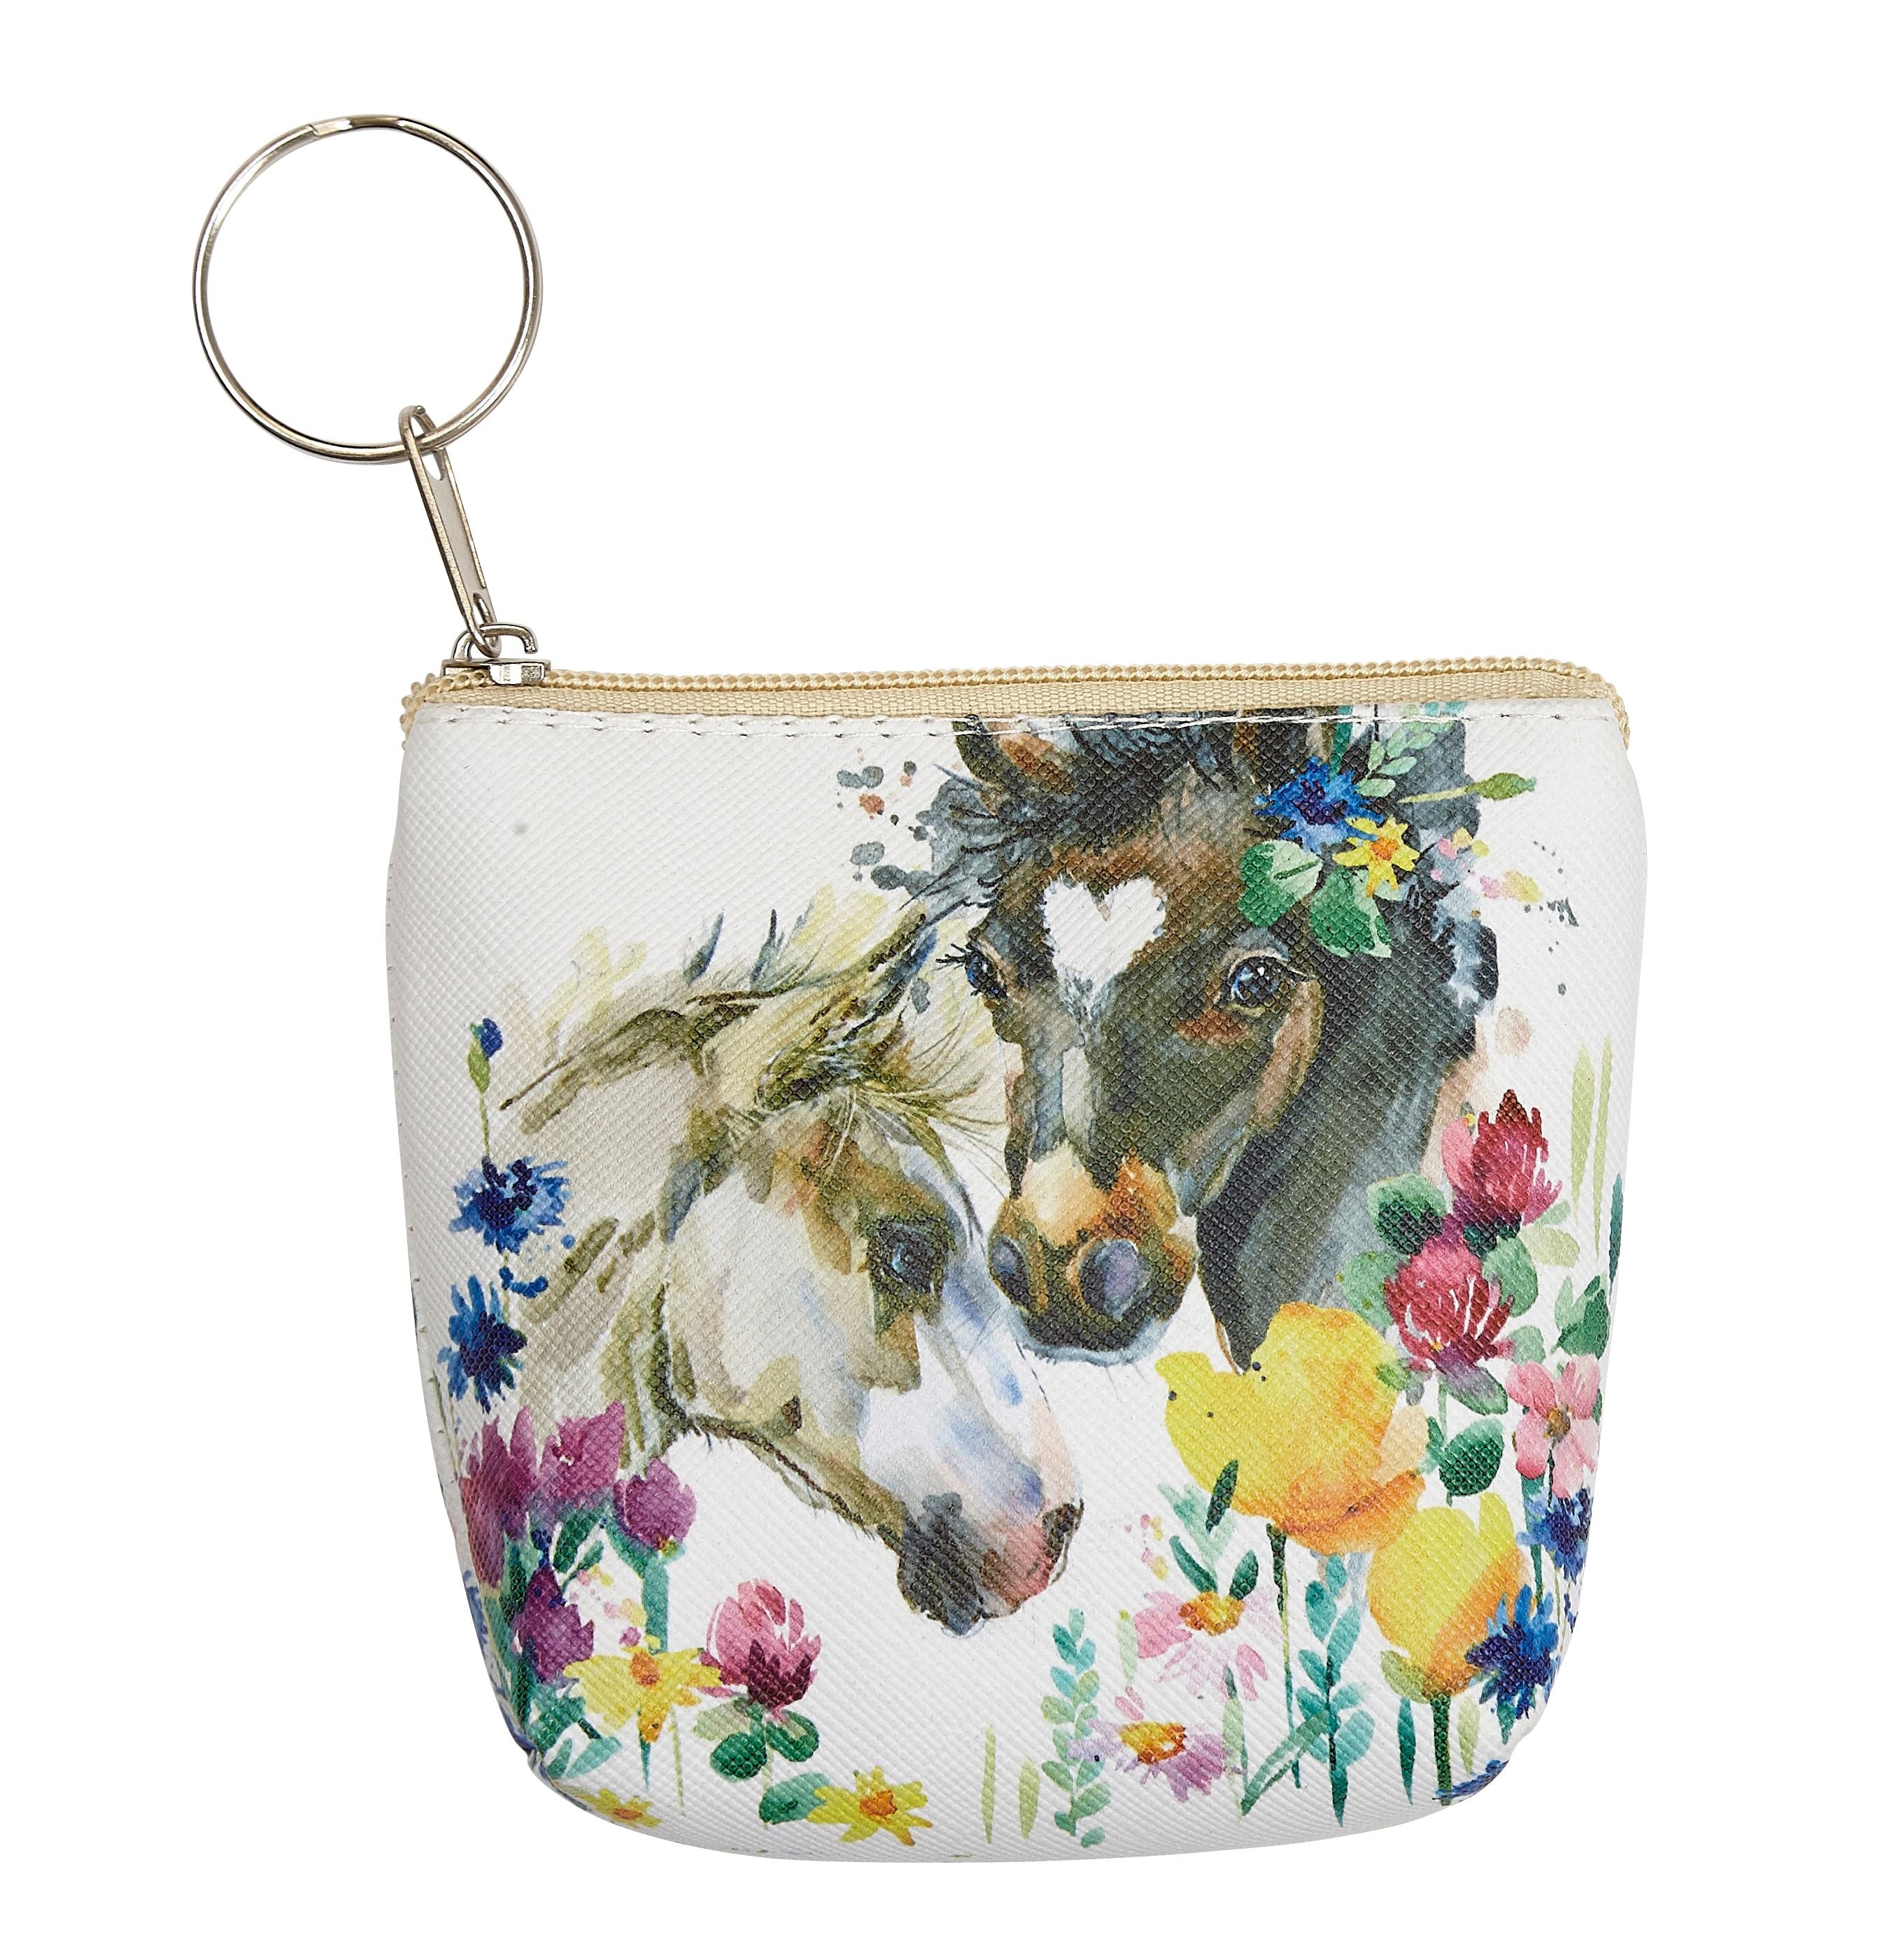 AWST Coin Purses with Cute Foals